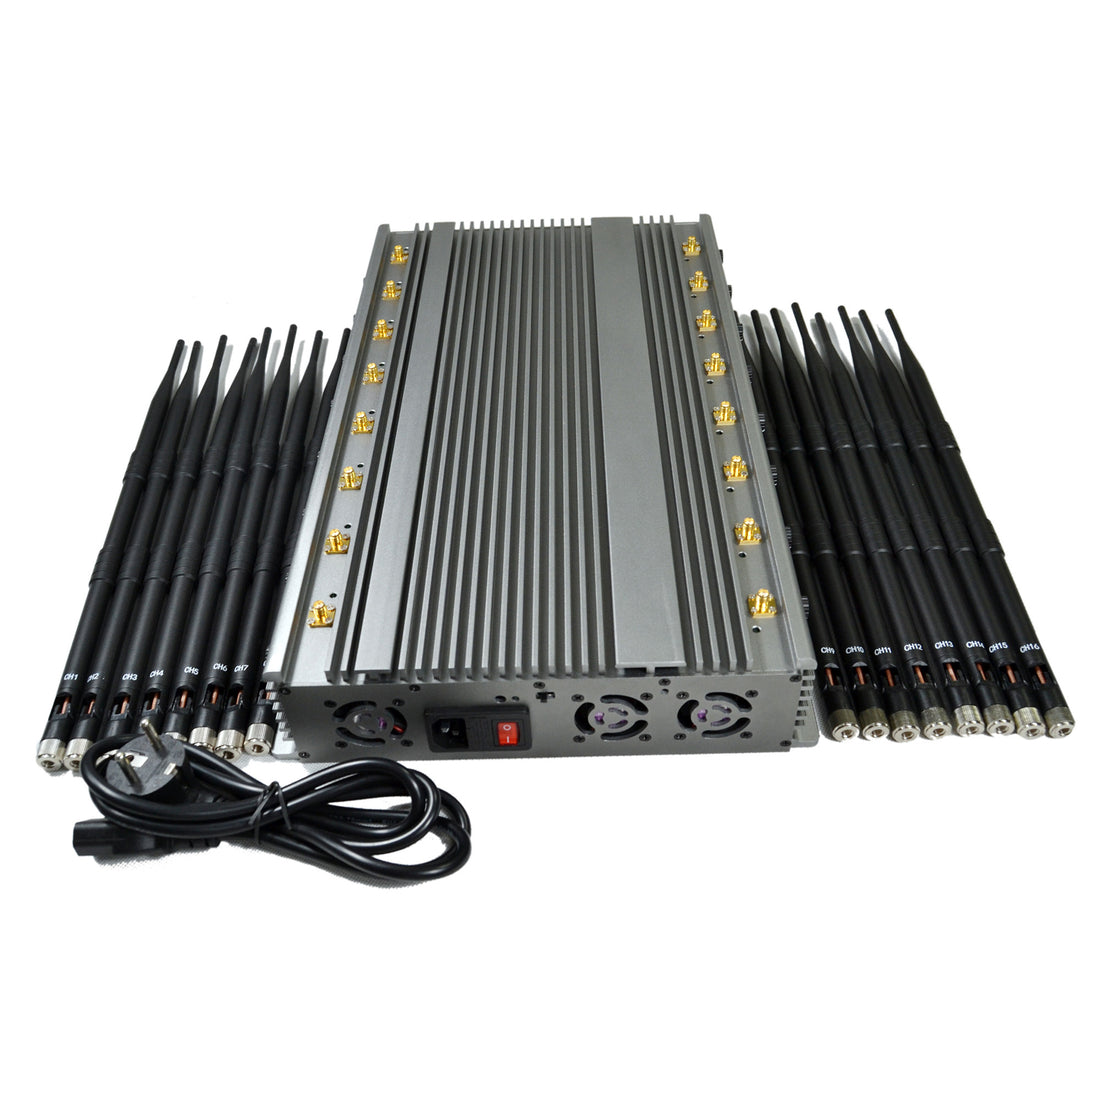 Is the higher the power of the mobile phone jammer in the examination room, the better?